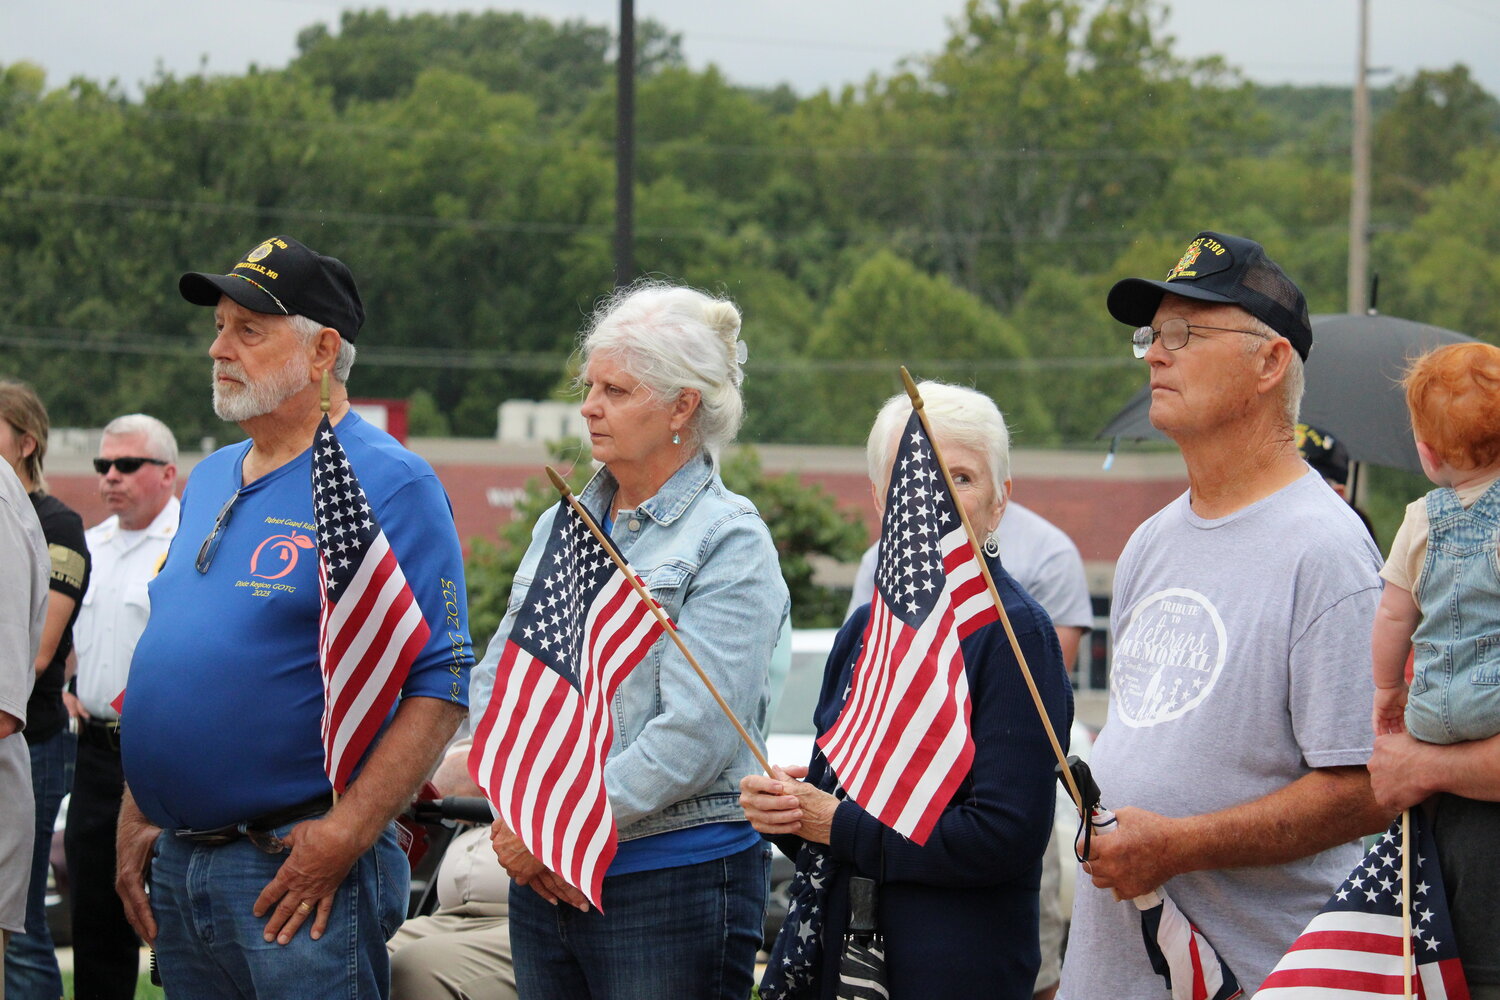 Several members of the crowd brought American flags with them to the ceremony.